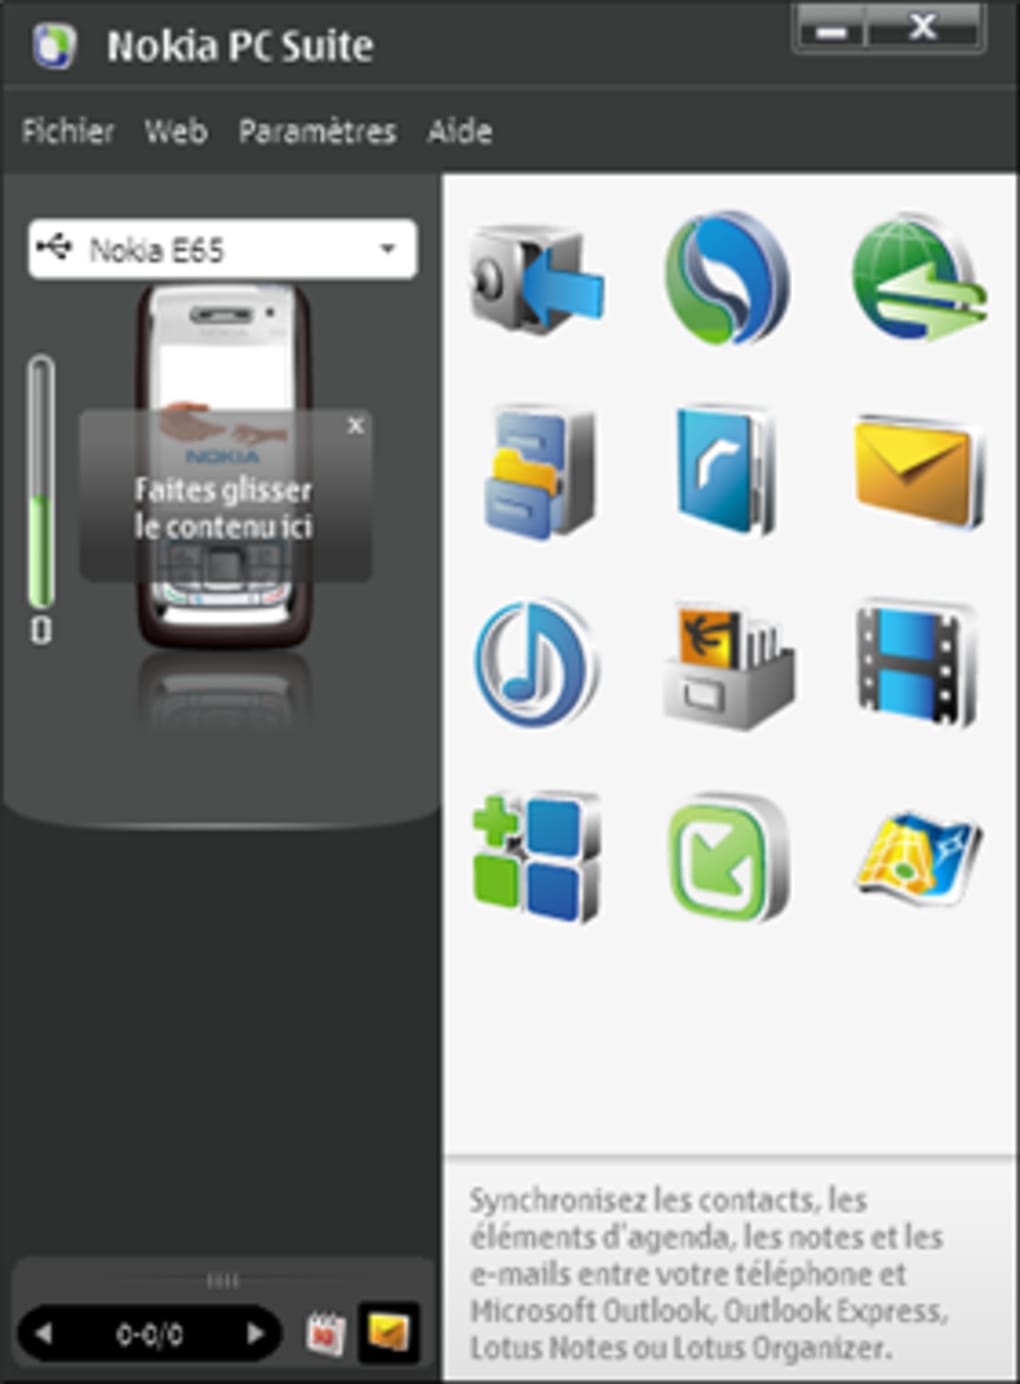 Nokia PC Suite for Android